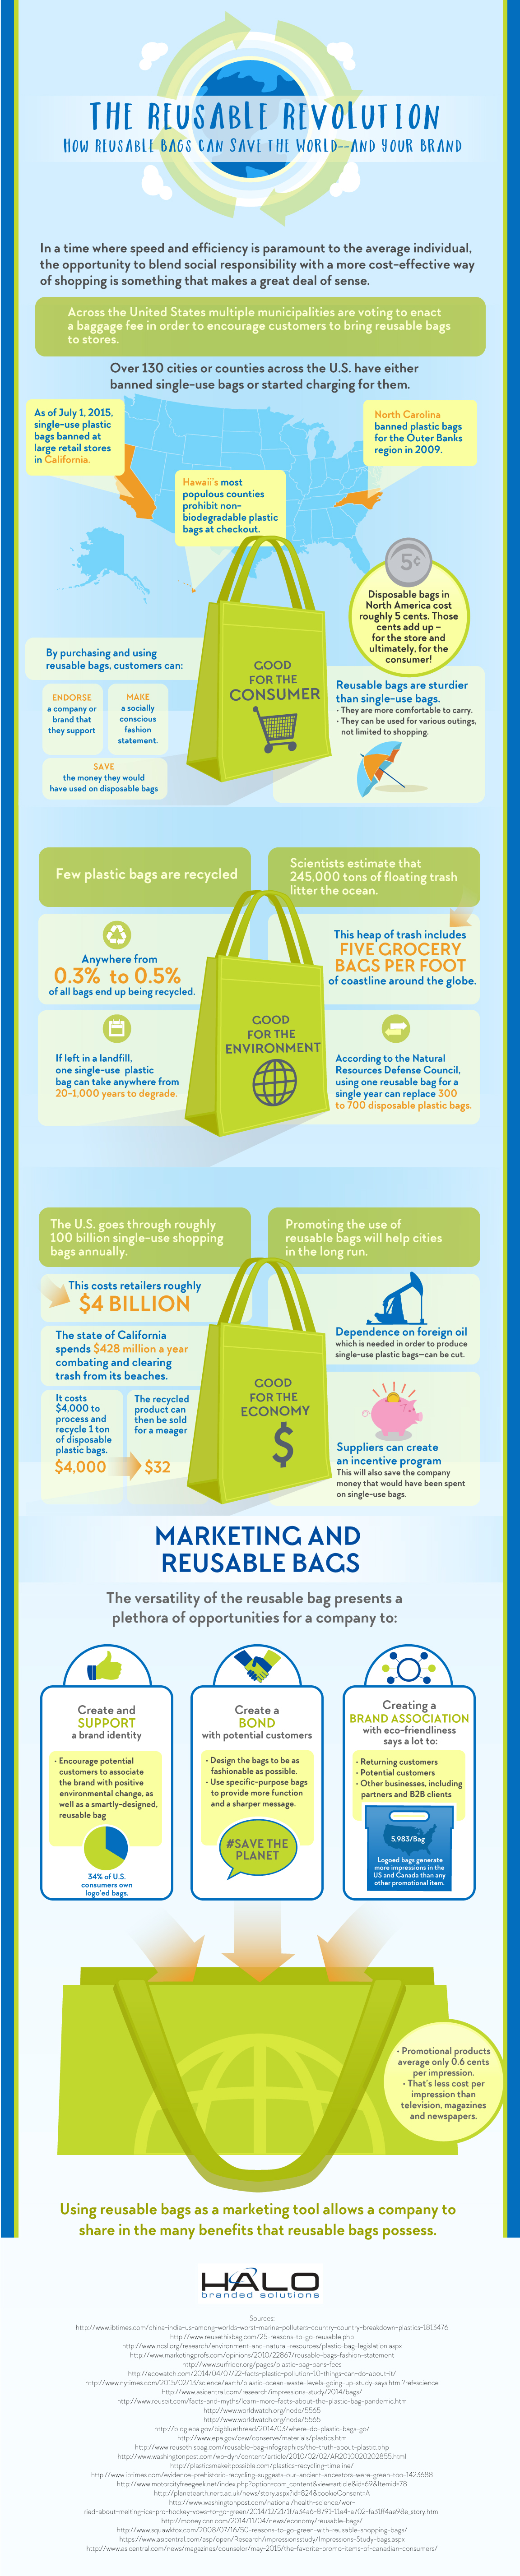 How Reusable Bags Can Save the World and Your Brand